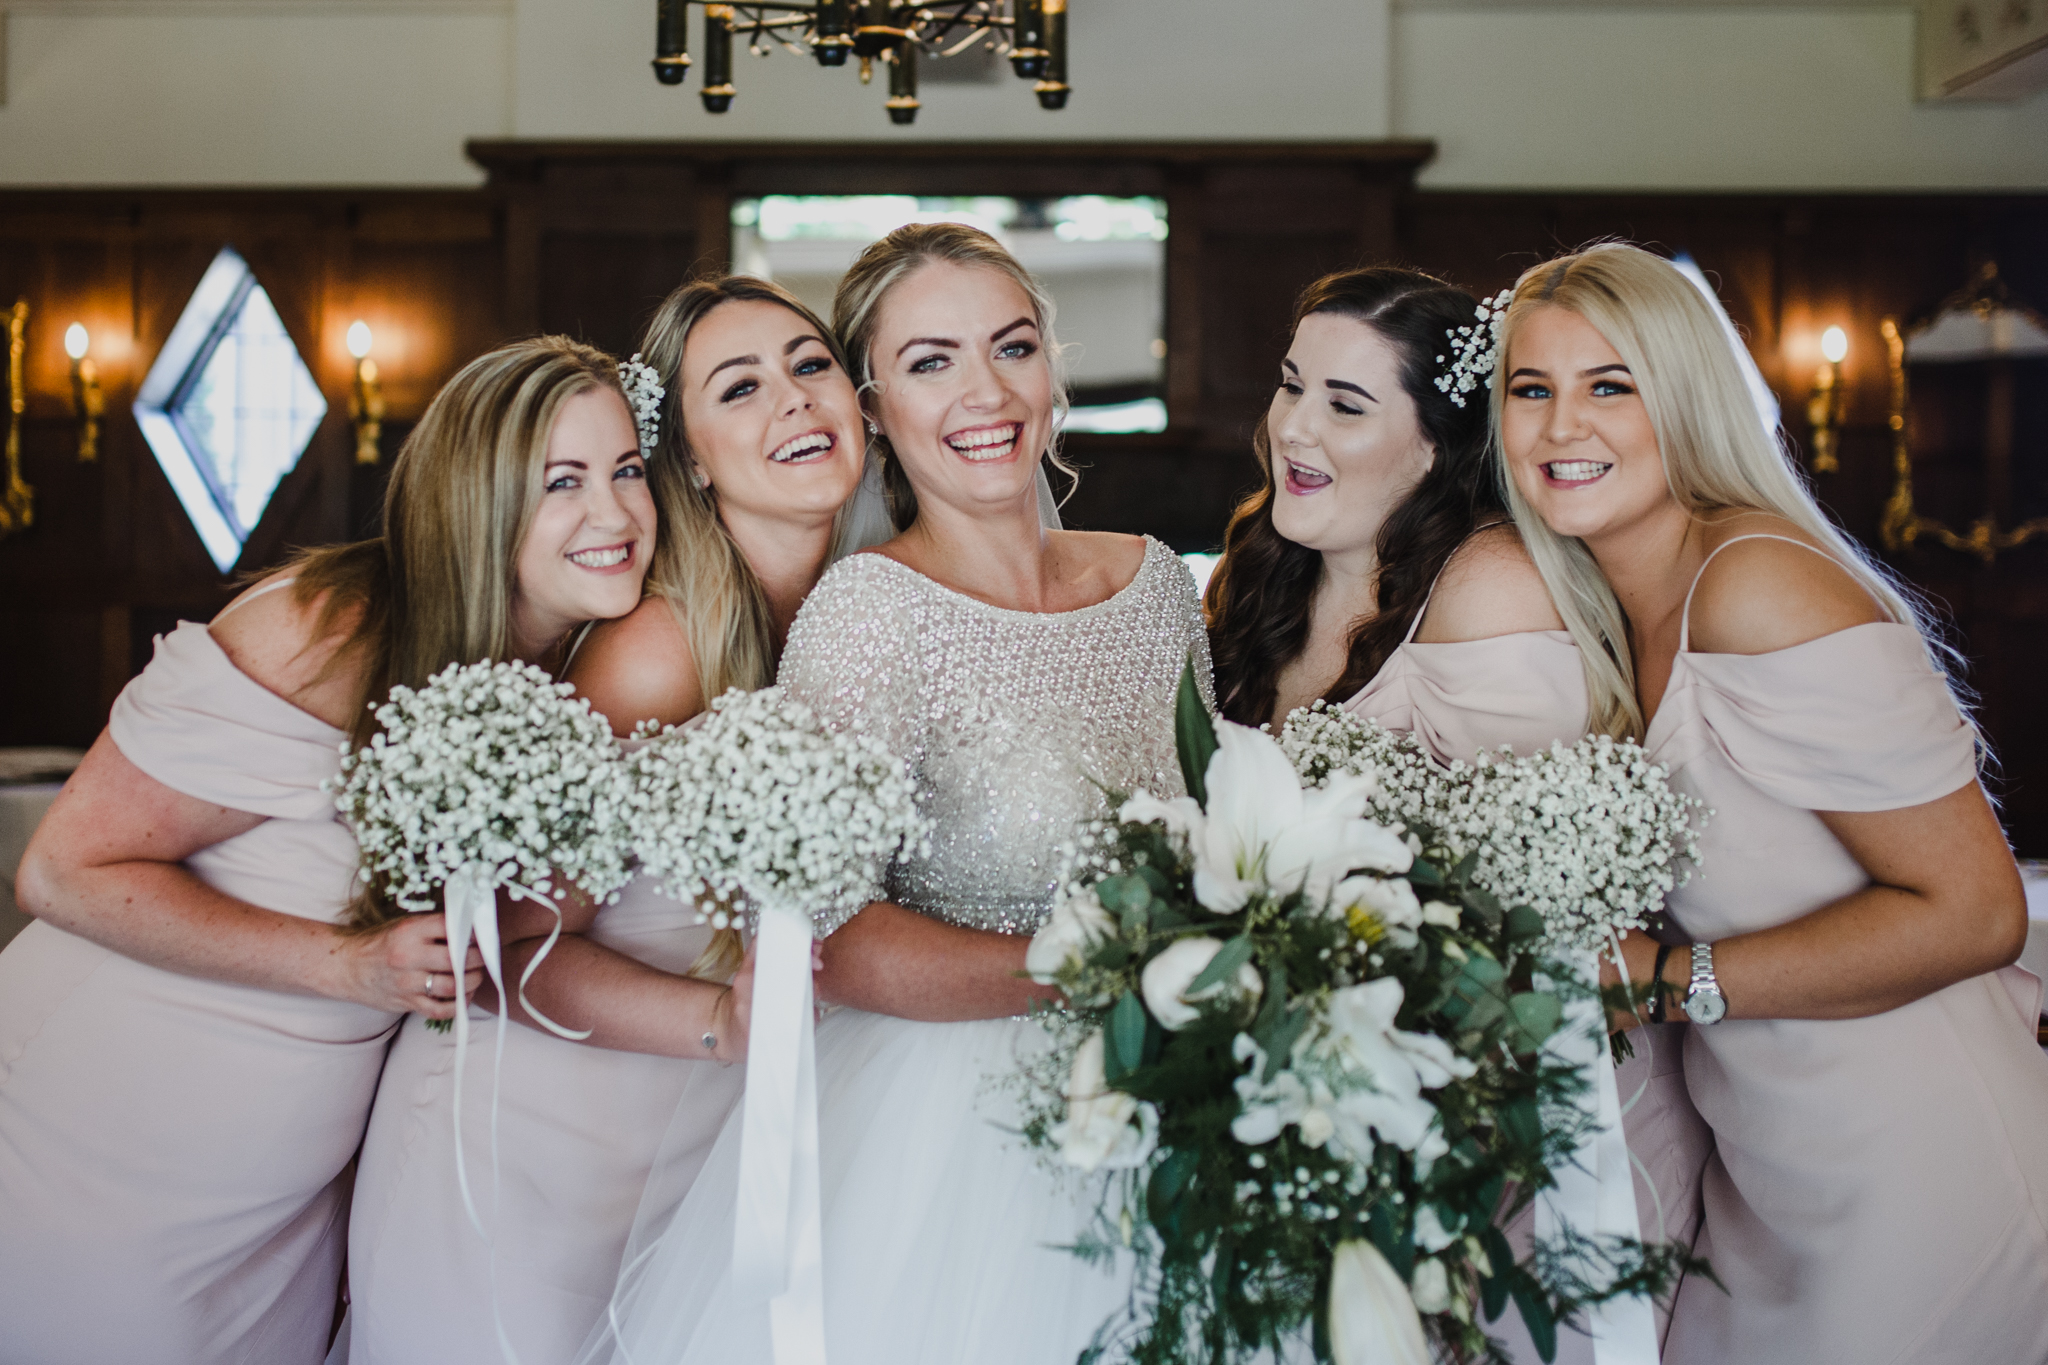 bride and her bridesmaids laughing together before a wedding